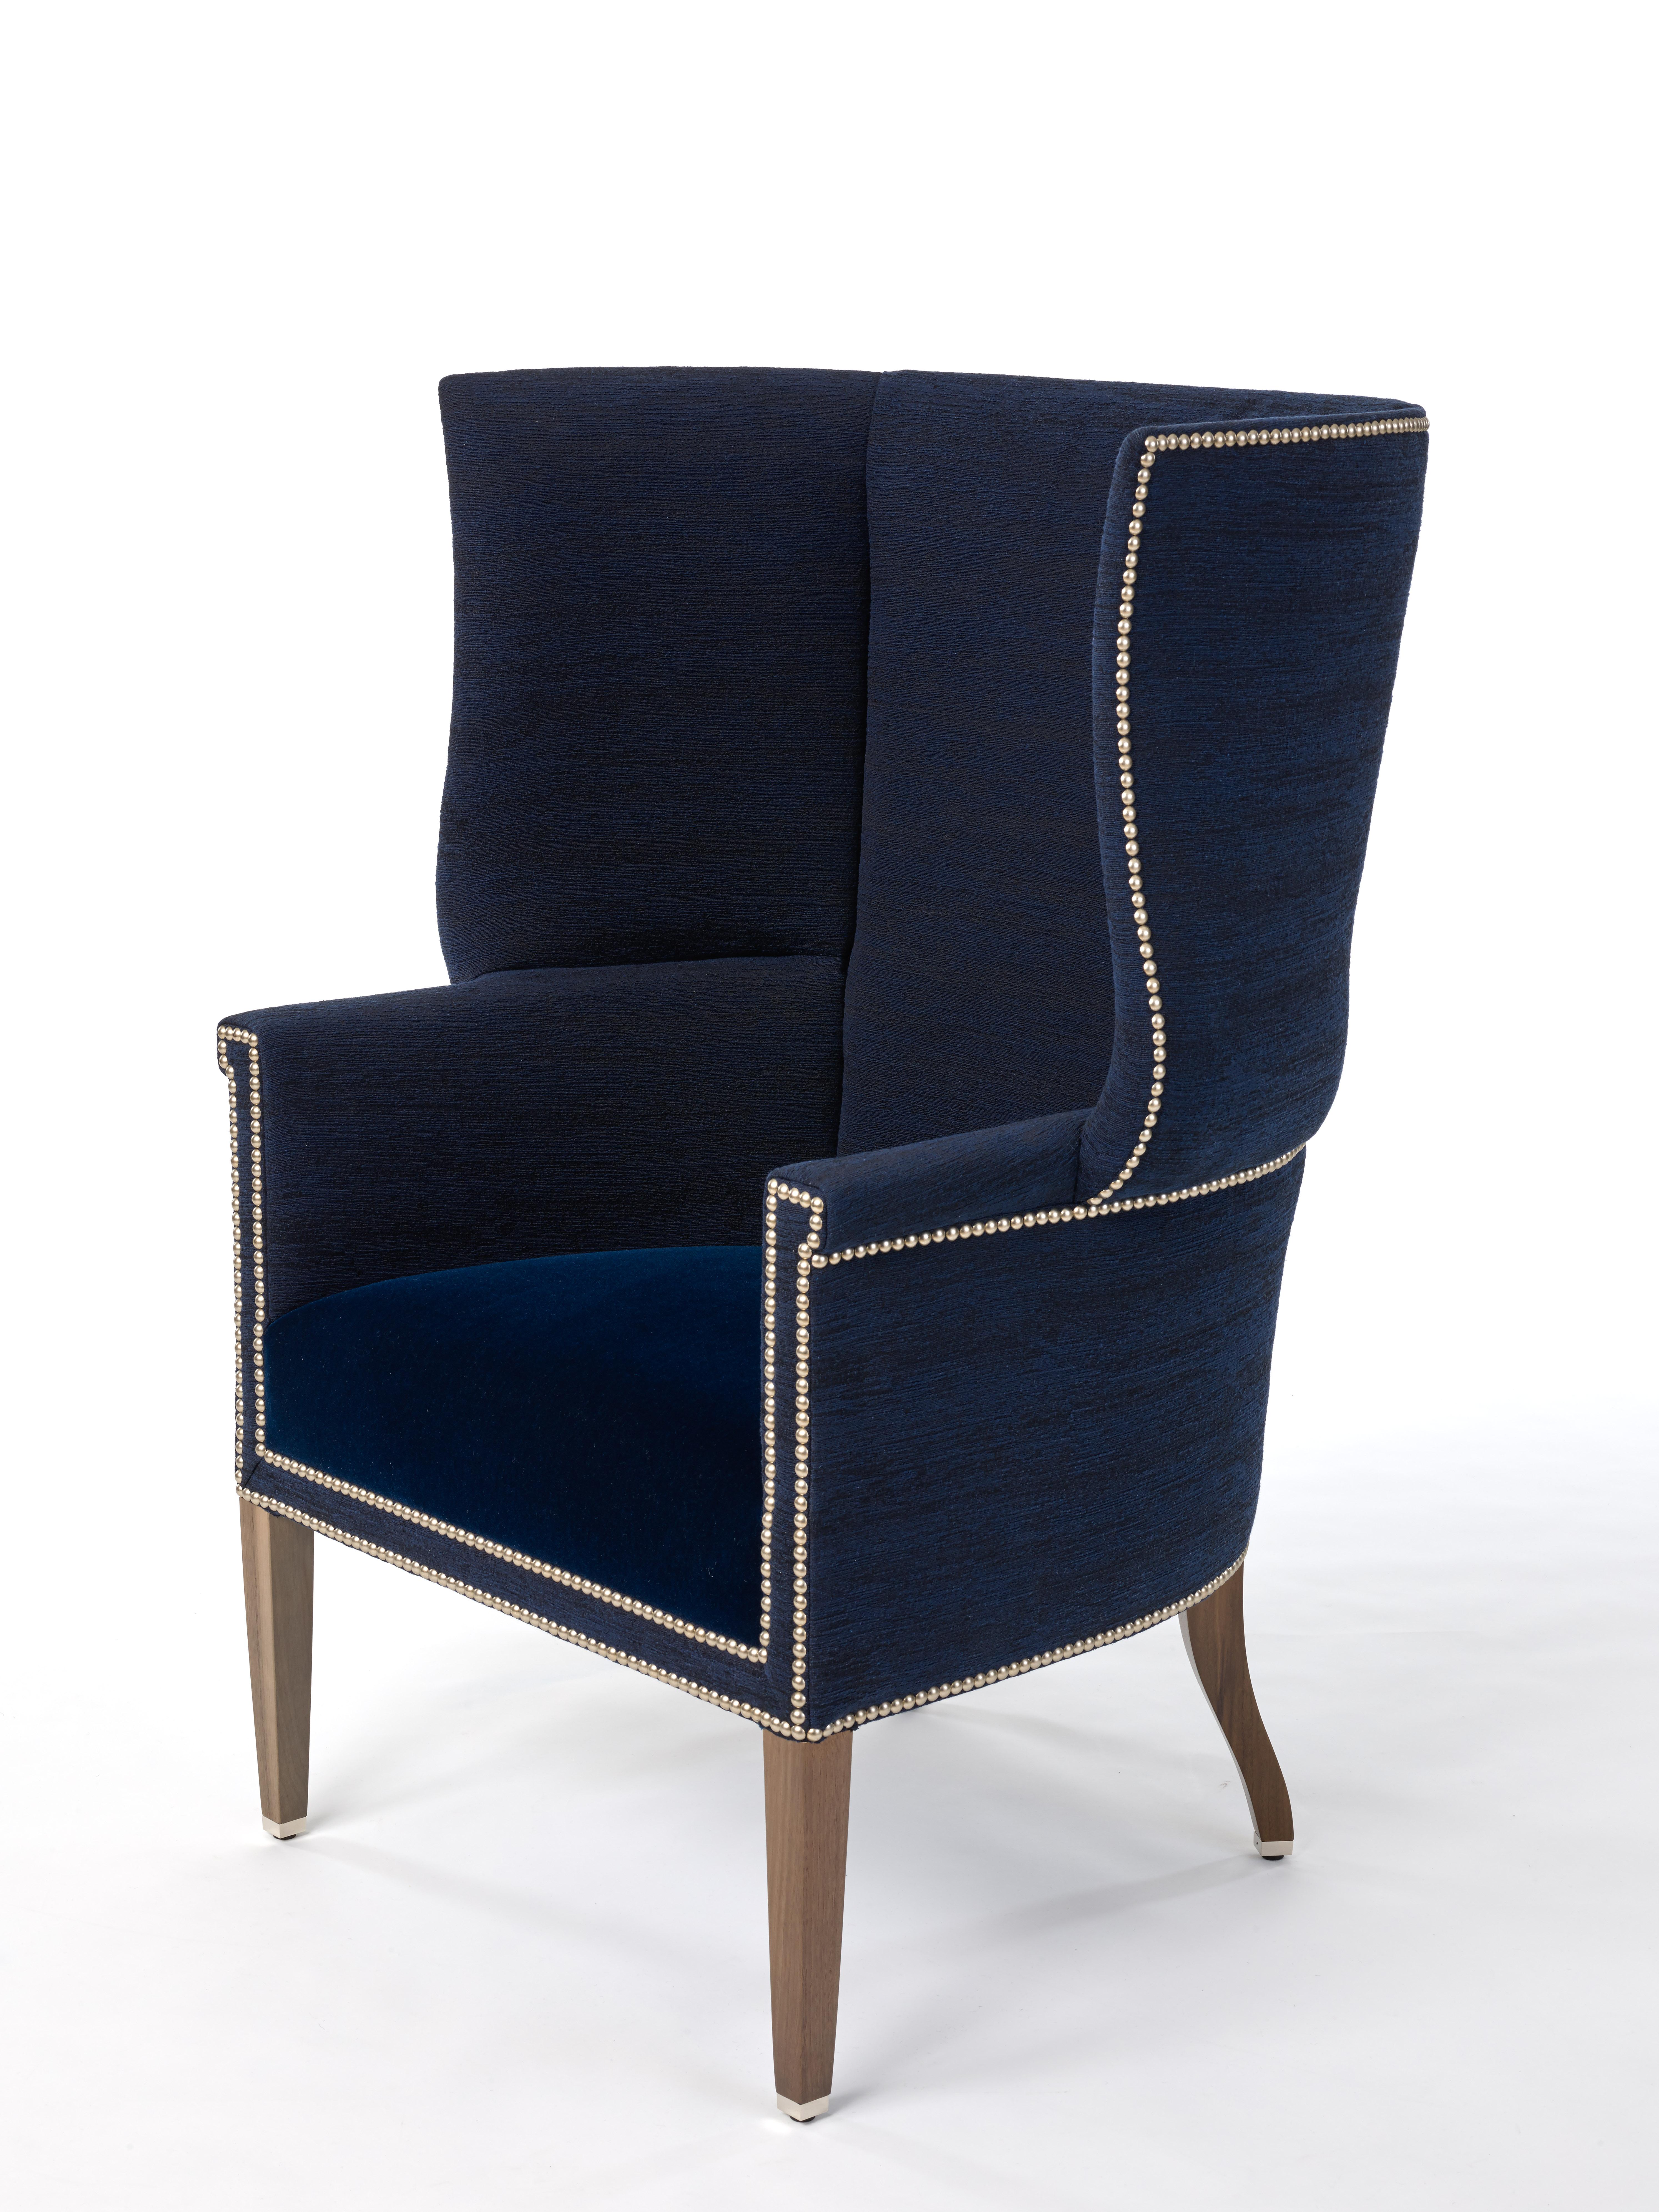 Angelo Donghia custom made this wing chair for a client's residence in the Canyon Country Club in Palm Springs. The Donghia Design Studio has updated the classic piece to exhibit a fresh, modern approach. Enhanced by bold curves, the wings are